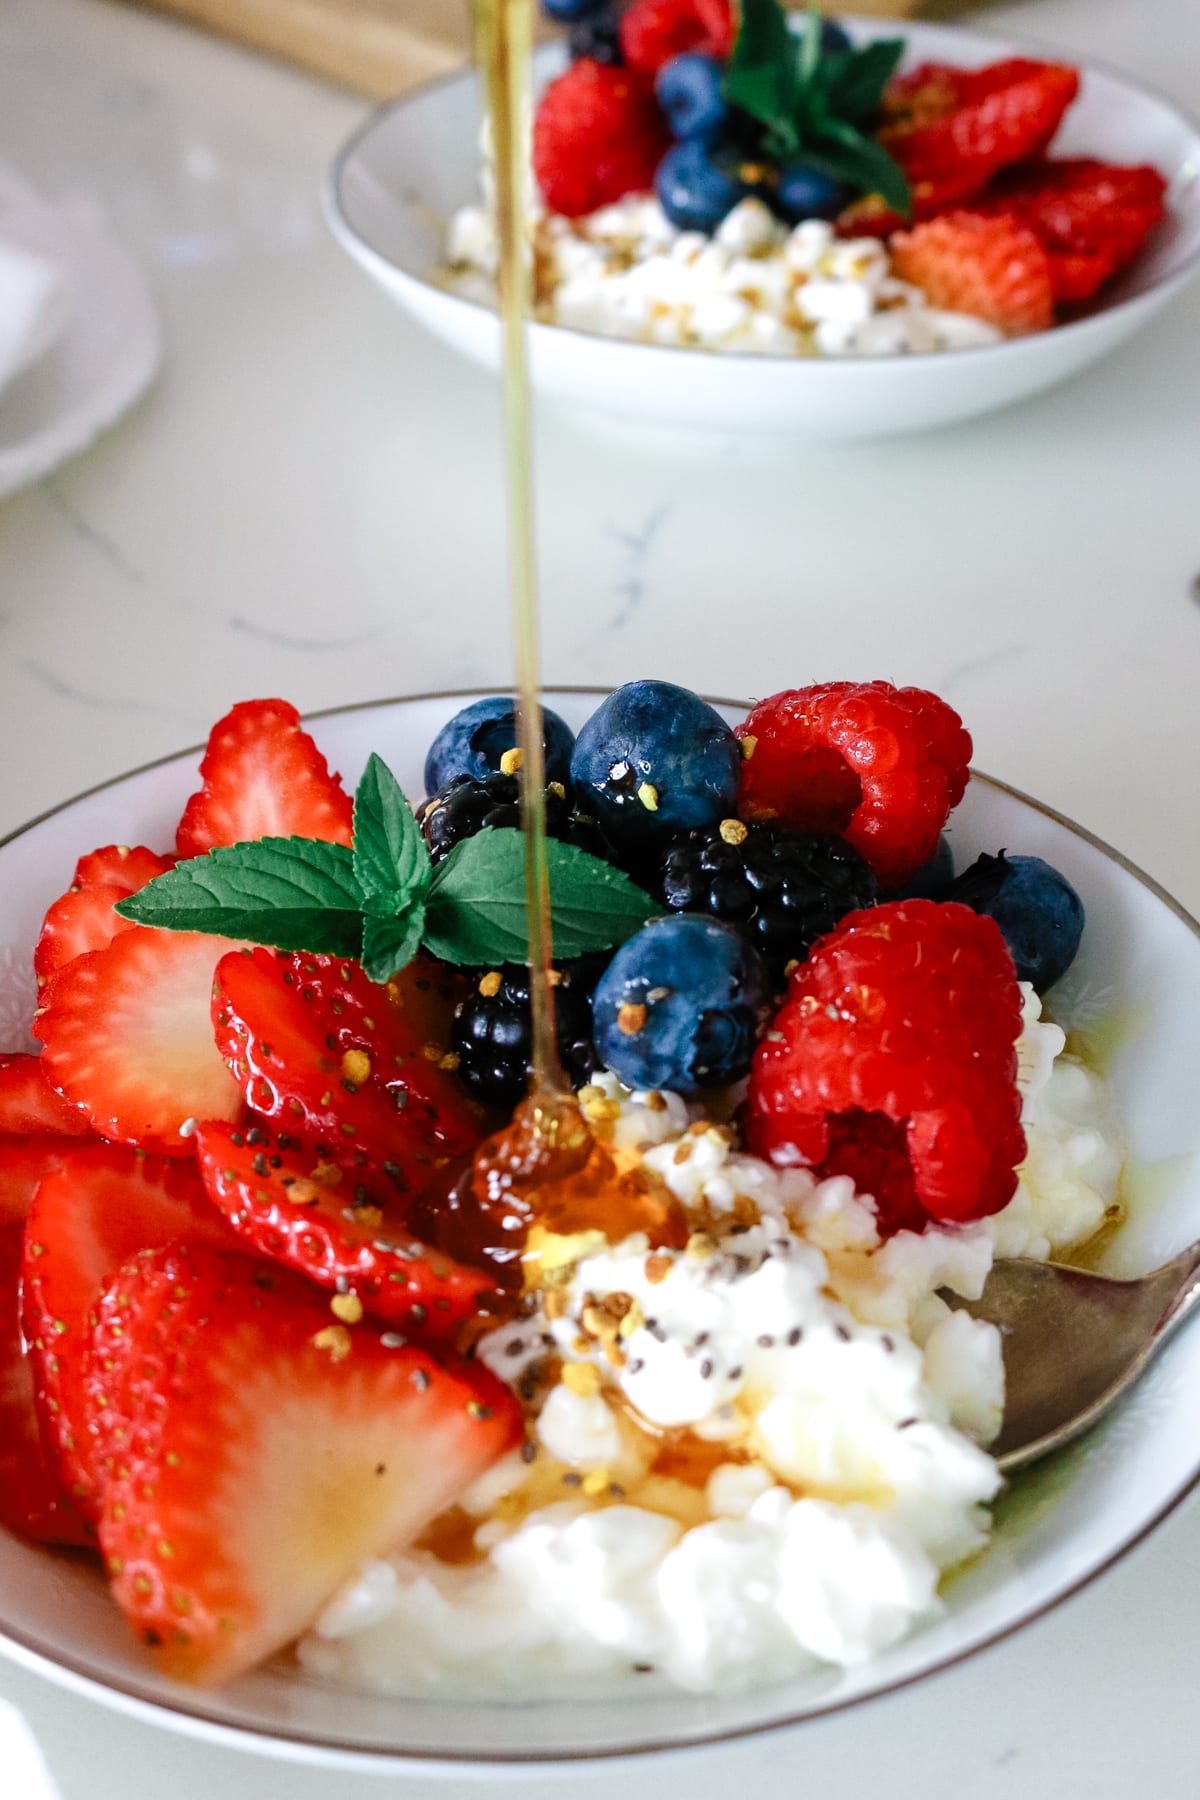 cottage cheese in a small bowl with sliced strawberries, raspberries, blueberries, blackberries, sprig of mint and honey being drizzled over the top.